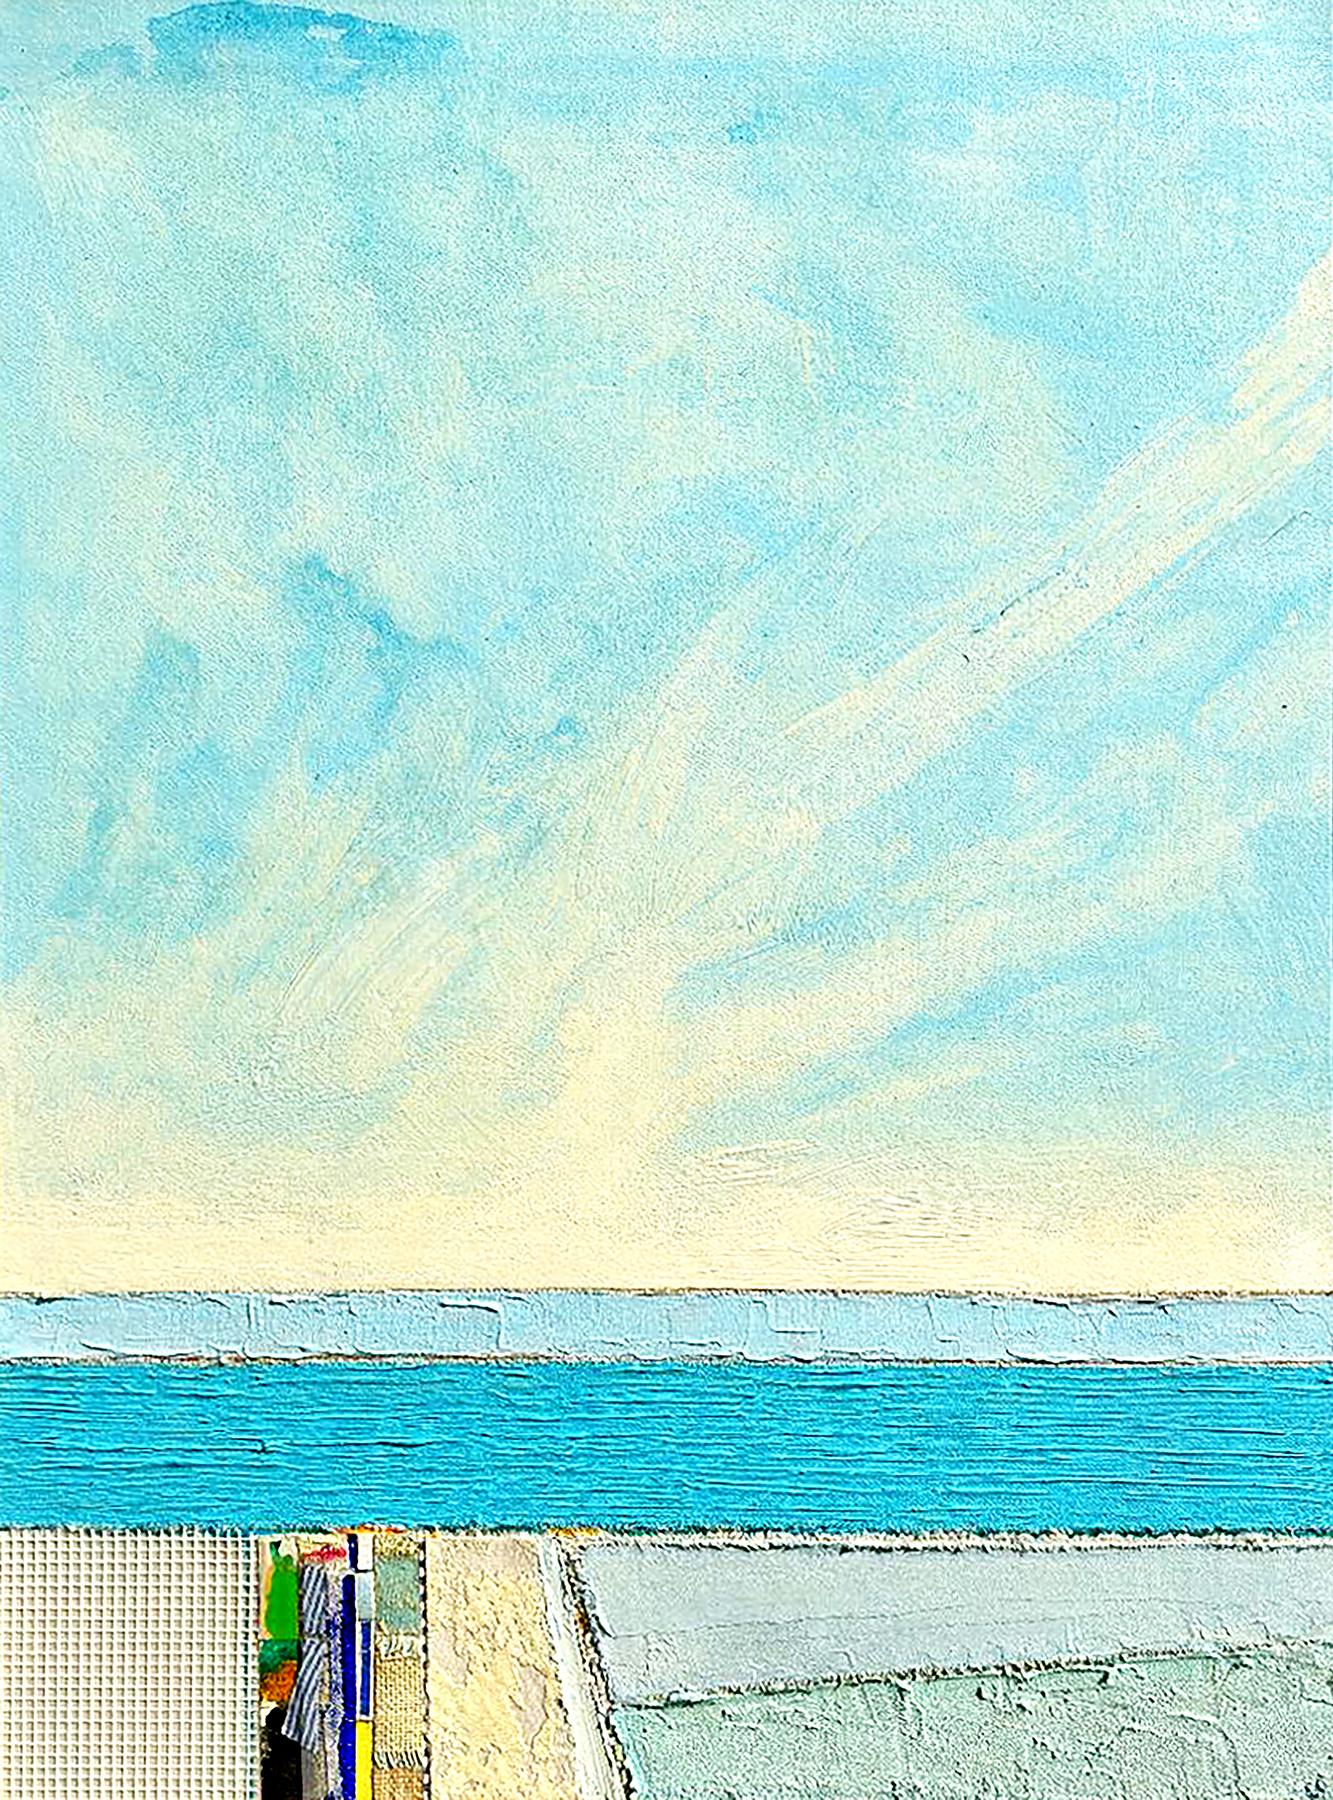 Available at Madelyn Jordon Fine Art. 'Oak Bluffs' by Eugene Healy, 2021. Oil and mixed media on canvas, 40 x 30 in. This landscape painting features an abstracted seascape with land, sea, and sky and the artist incorporates sections of texture and